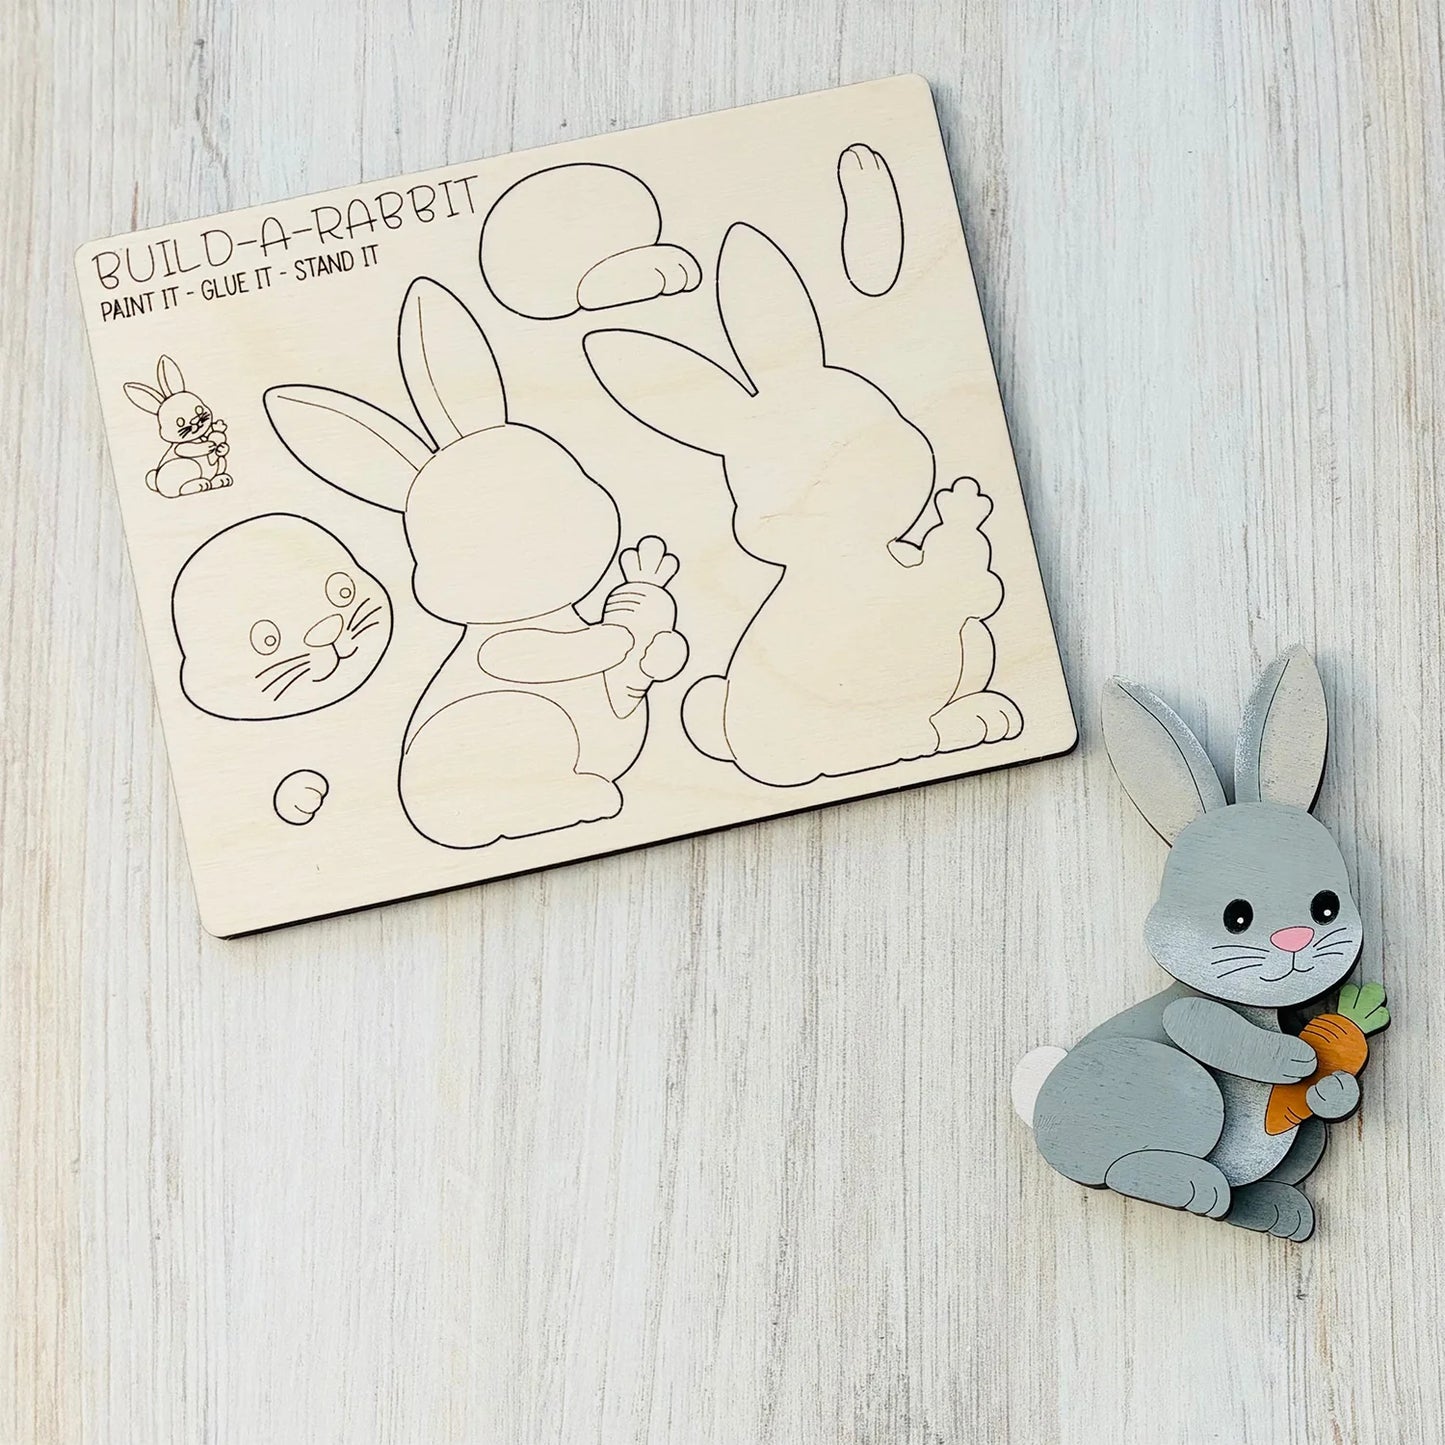  Introducing our Easter Friends Pop Out Cards - an engaging and delightful kids' activity! Choose from Bunny, Lamb, and Chick designs. The DIY cards are perfect for painting and gluing together. Once completed, these charming characters can be stood up, doubling as adorable Easter decorations. Encourage creativity and make this Easter unforgettable for your little ones!